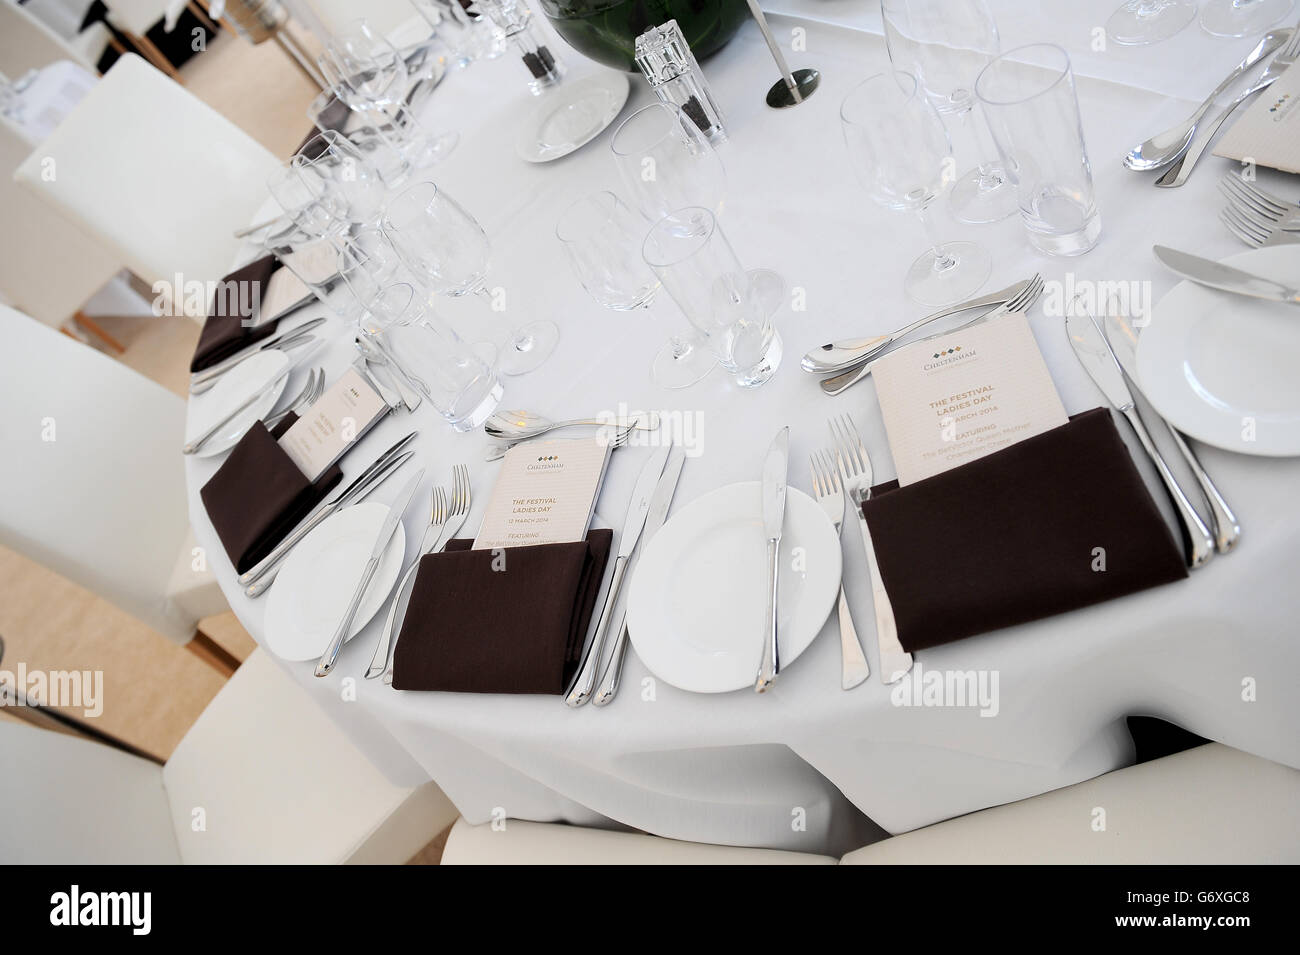 Table placings set out to receive guests in the Fairlawne Restaurant Stock Photo